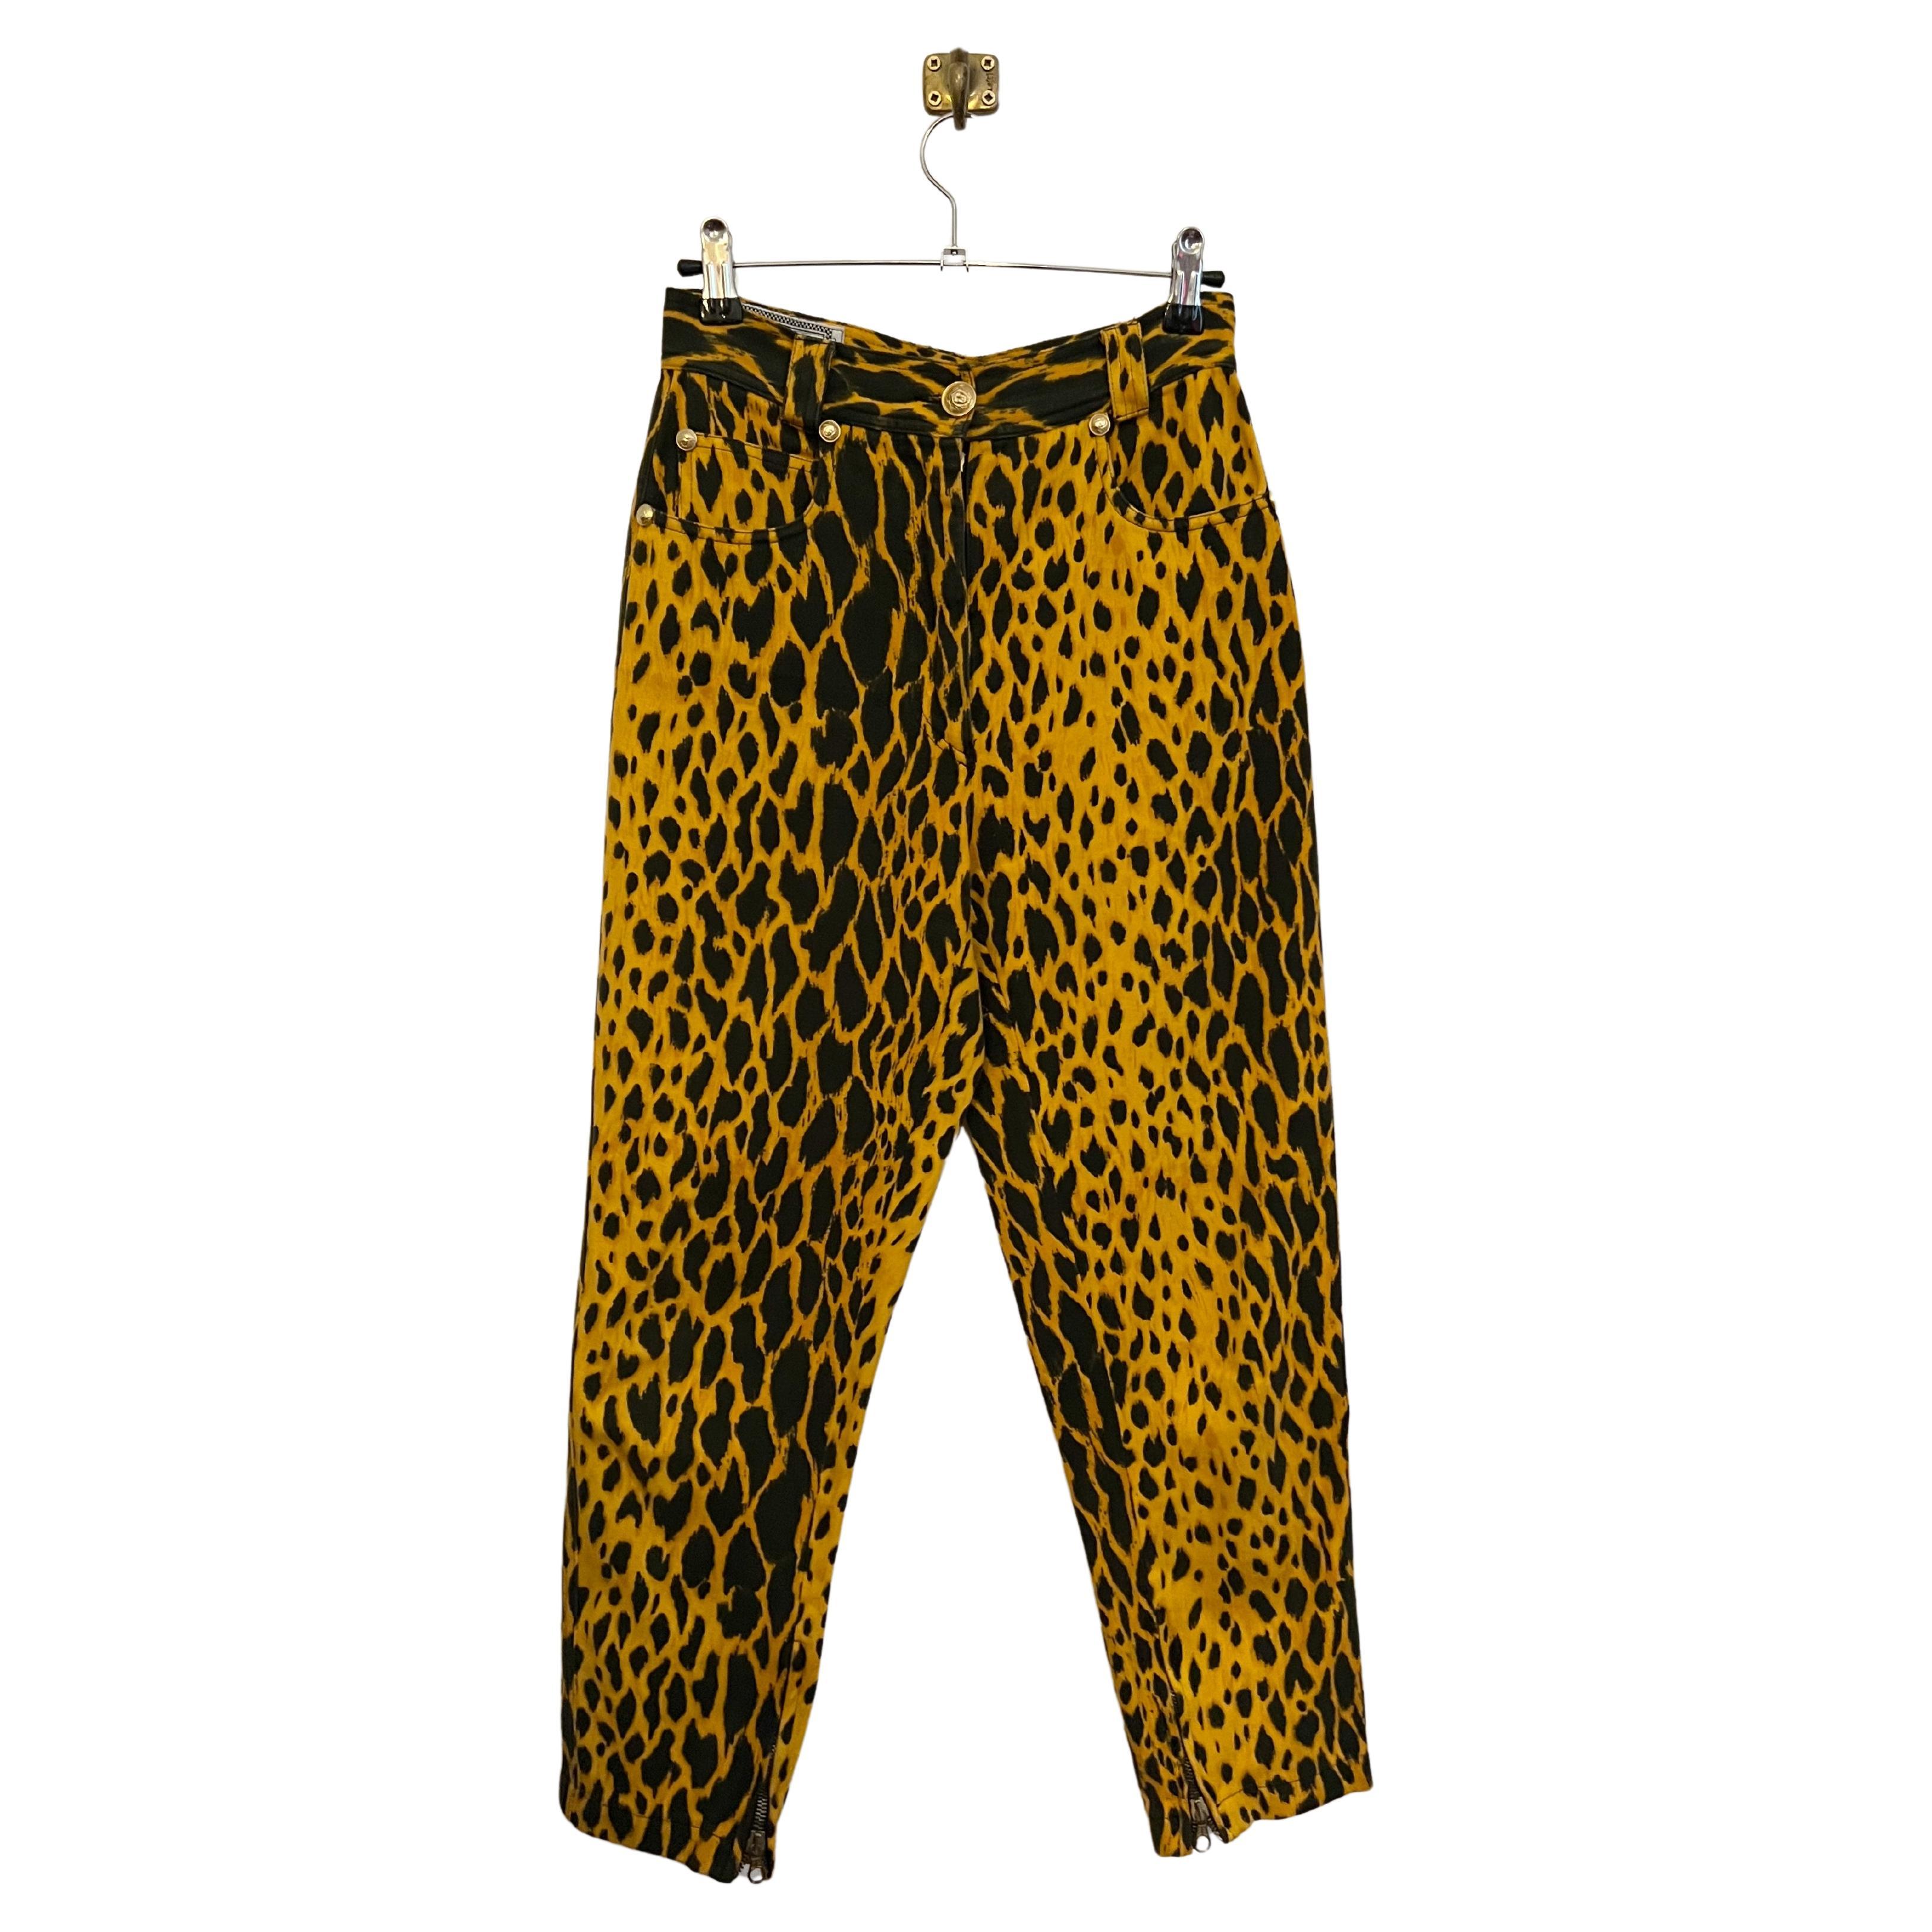 Spring 1992 Gianni Versace Runway Cheetah Leopard High waisted patterned Jeans